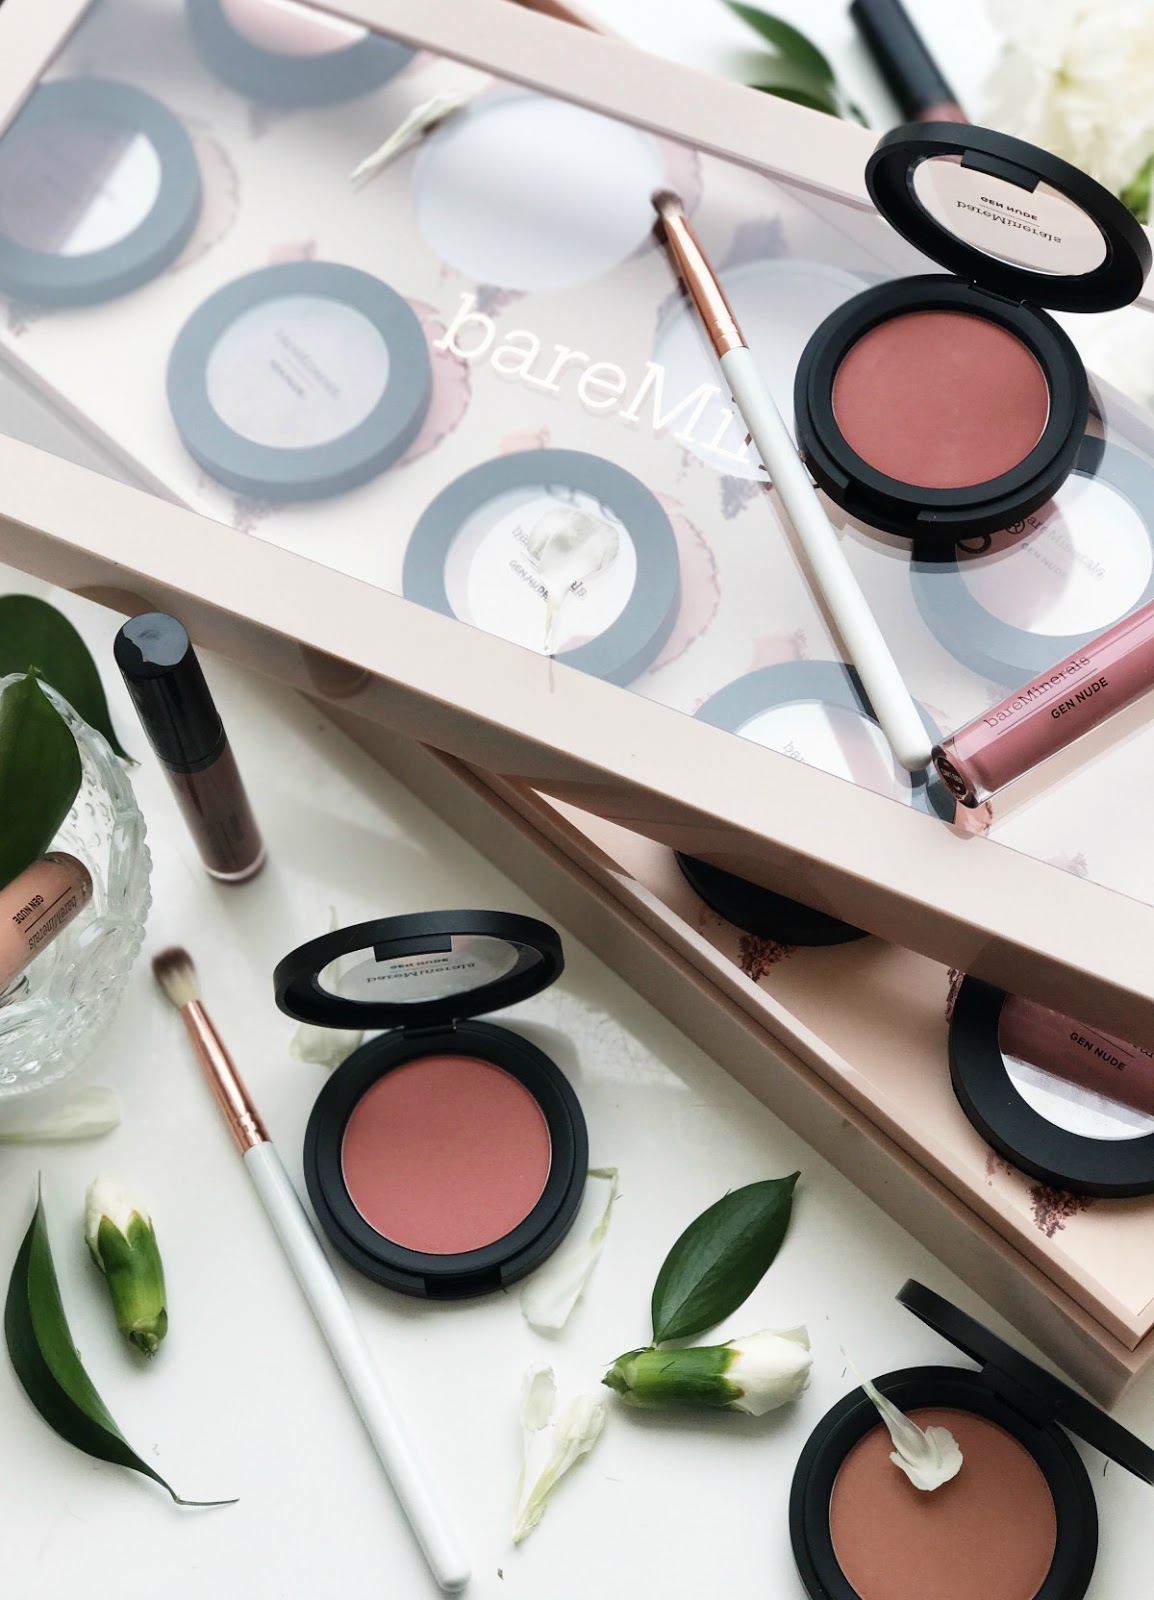 The Blush Range That Caters to Every Skin Tone